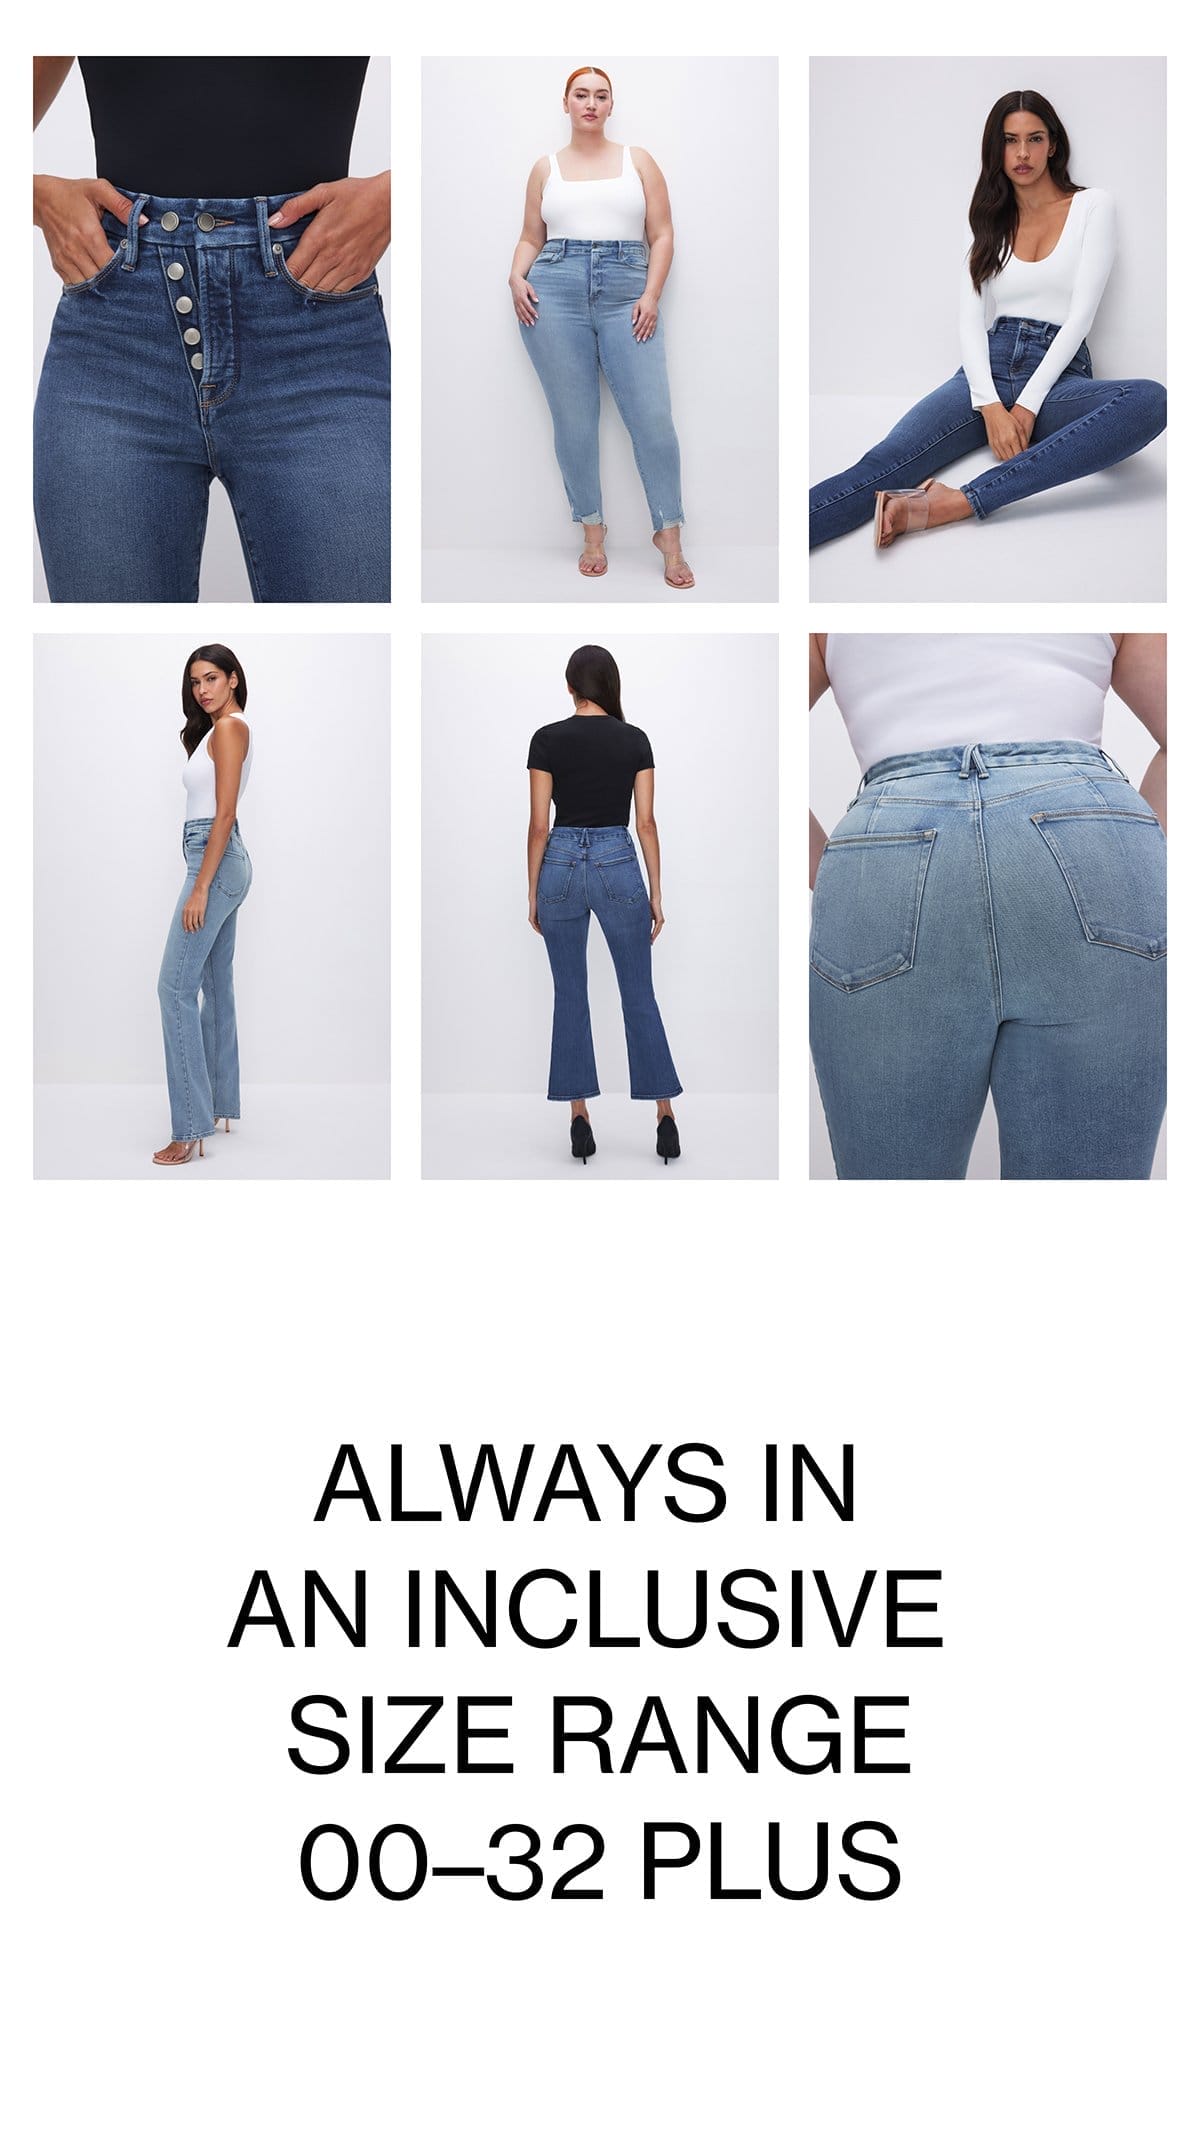 ALWAYS IN AN INCLUSIVE SIZE RANGE